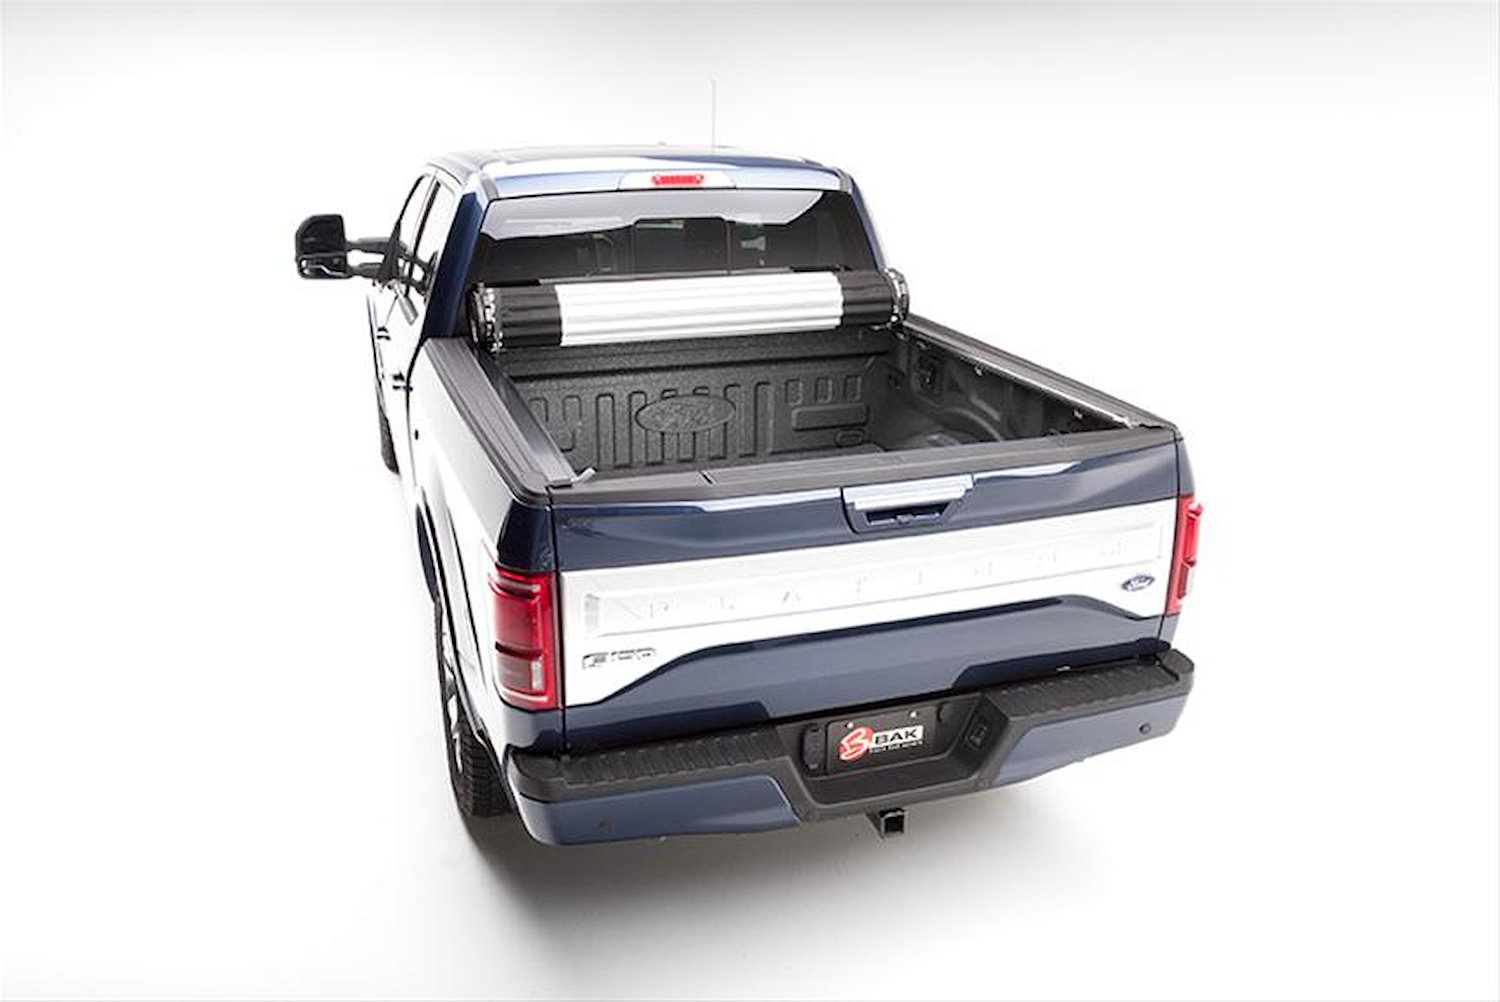 39328 Revolver X2 for 15-20 Ford F150 8.2 ft. Bed, Roll-Up Hard Cover Style [Black Finish]